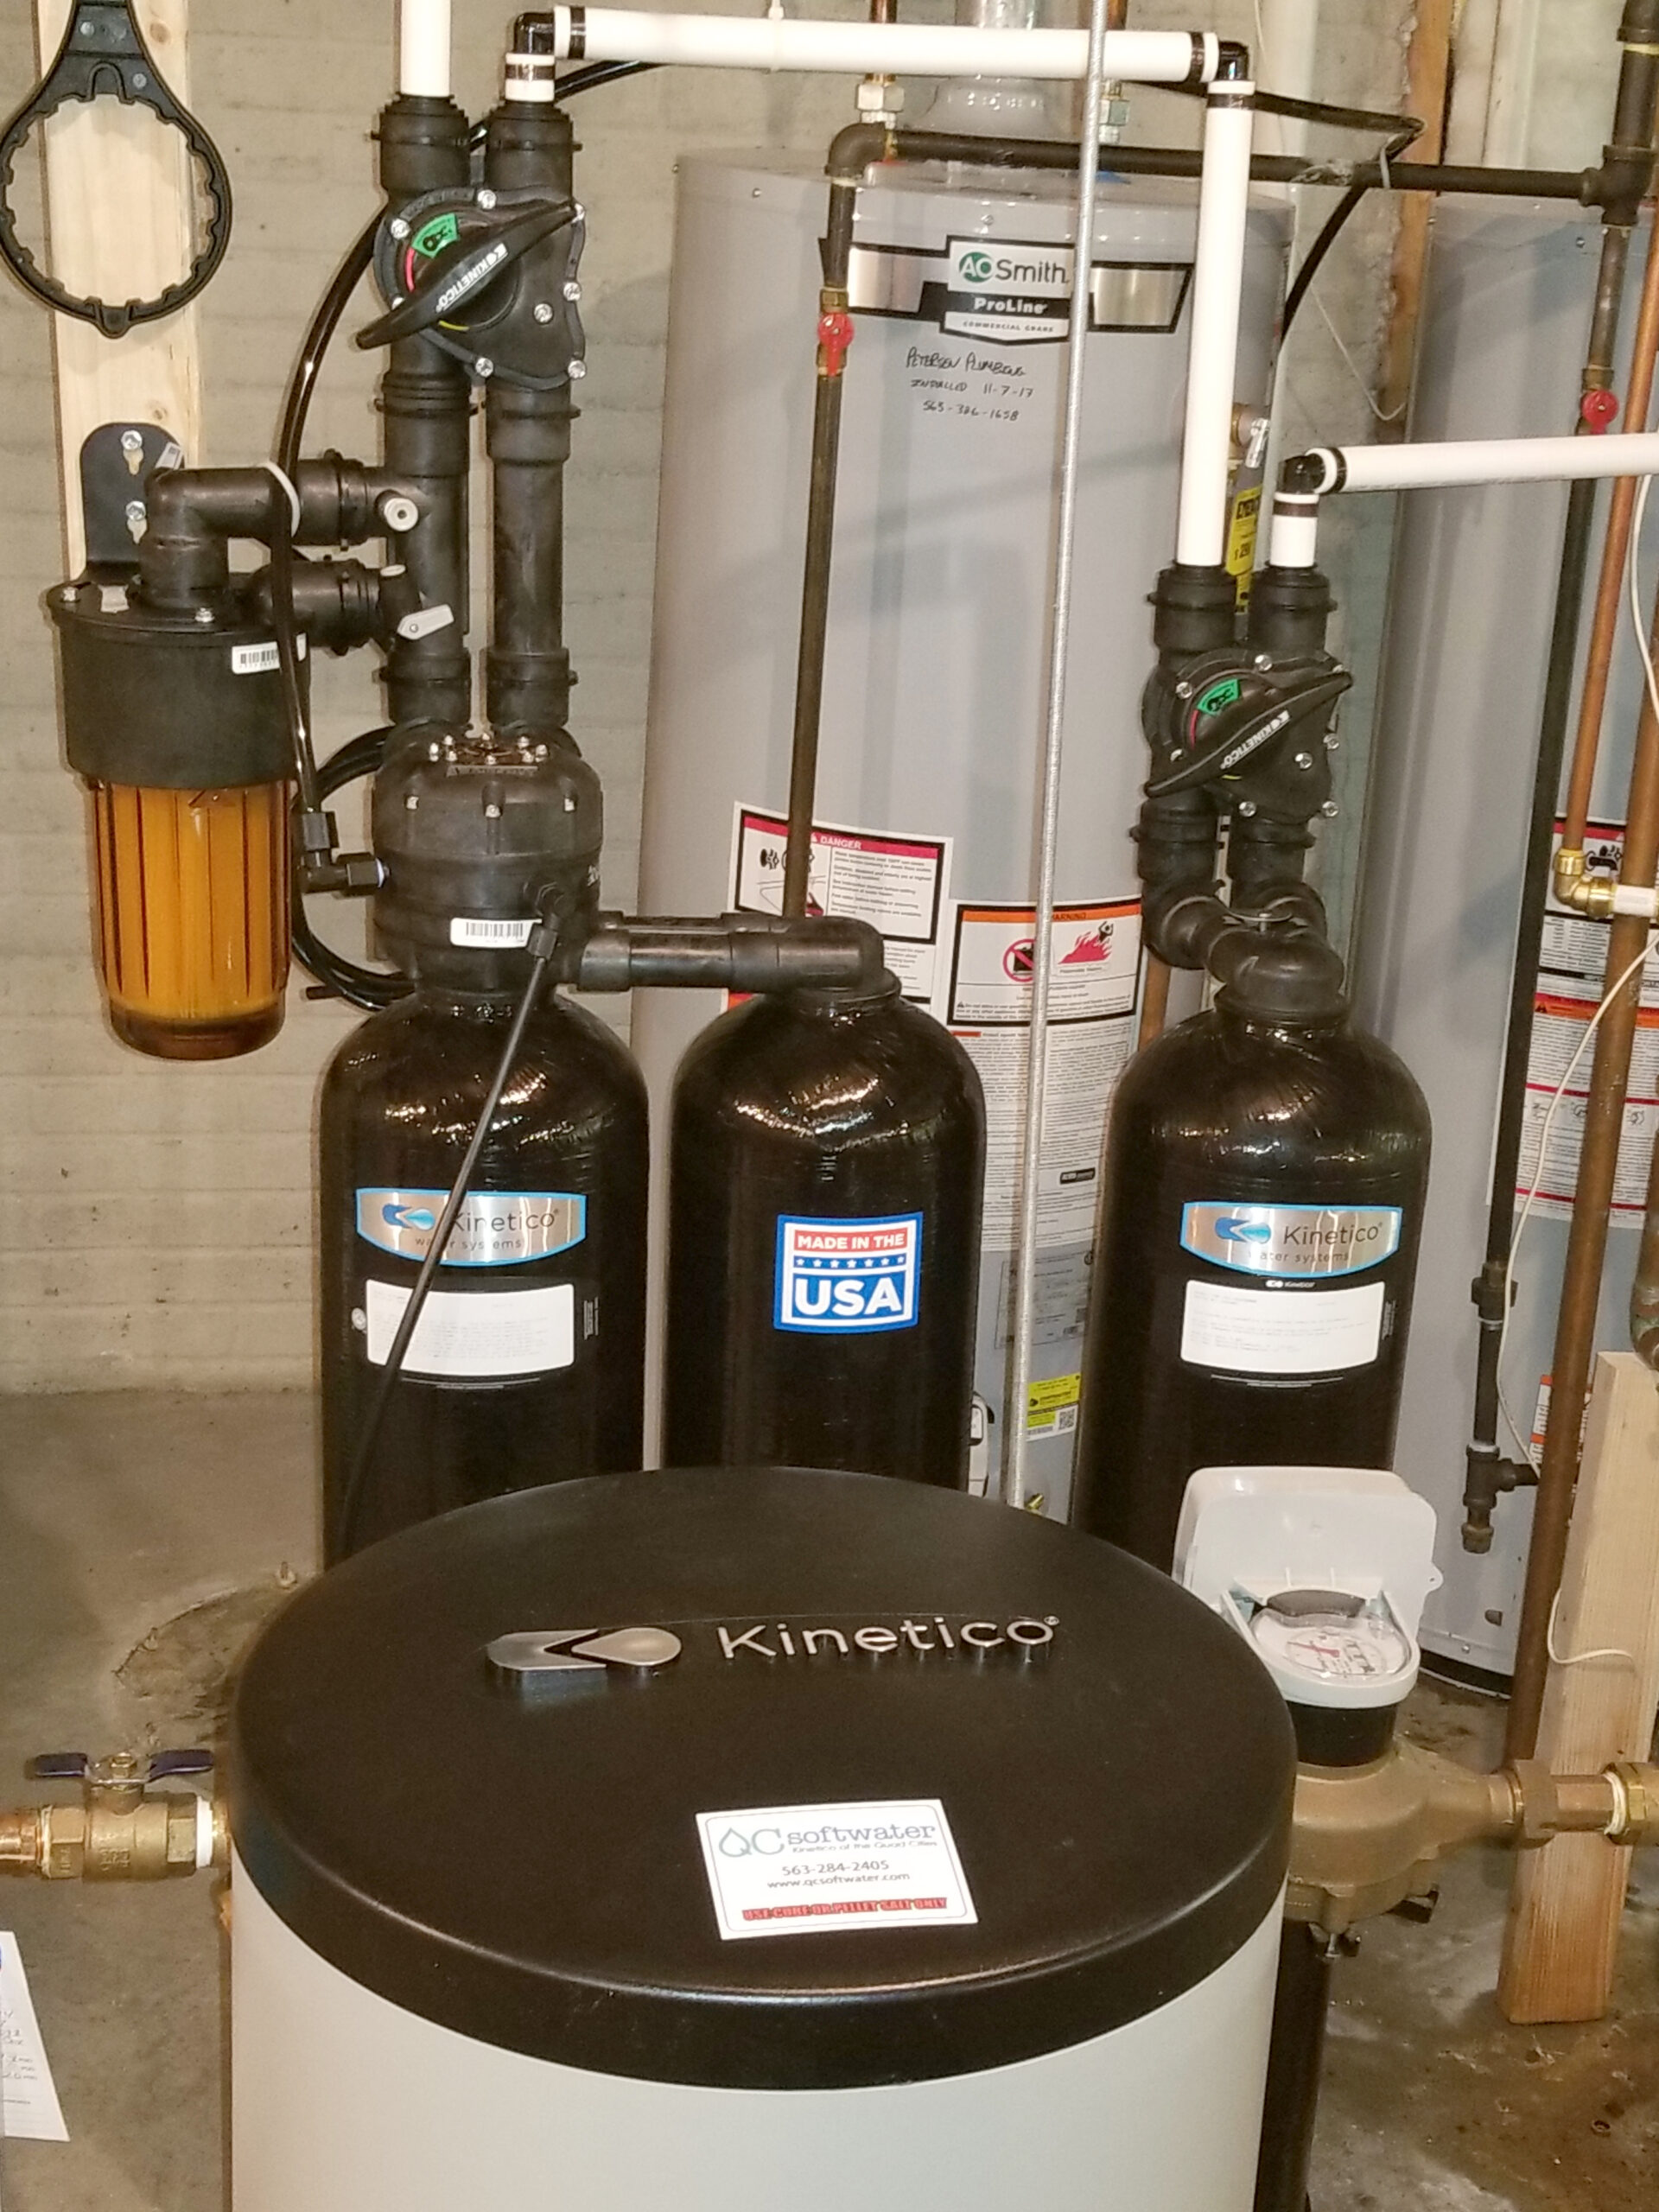 Chlorine removal with a Kinetico water softener